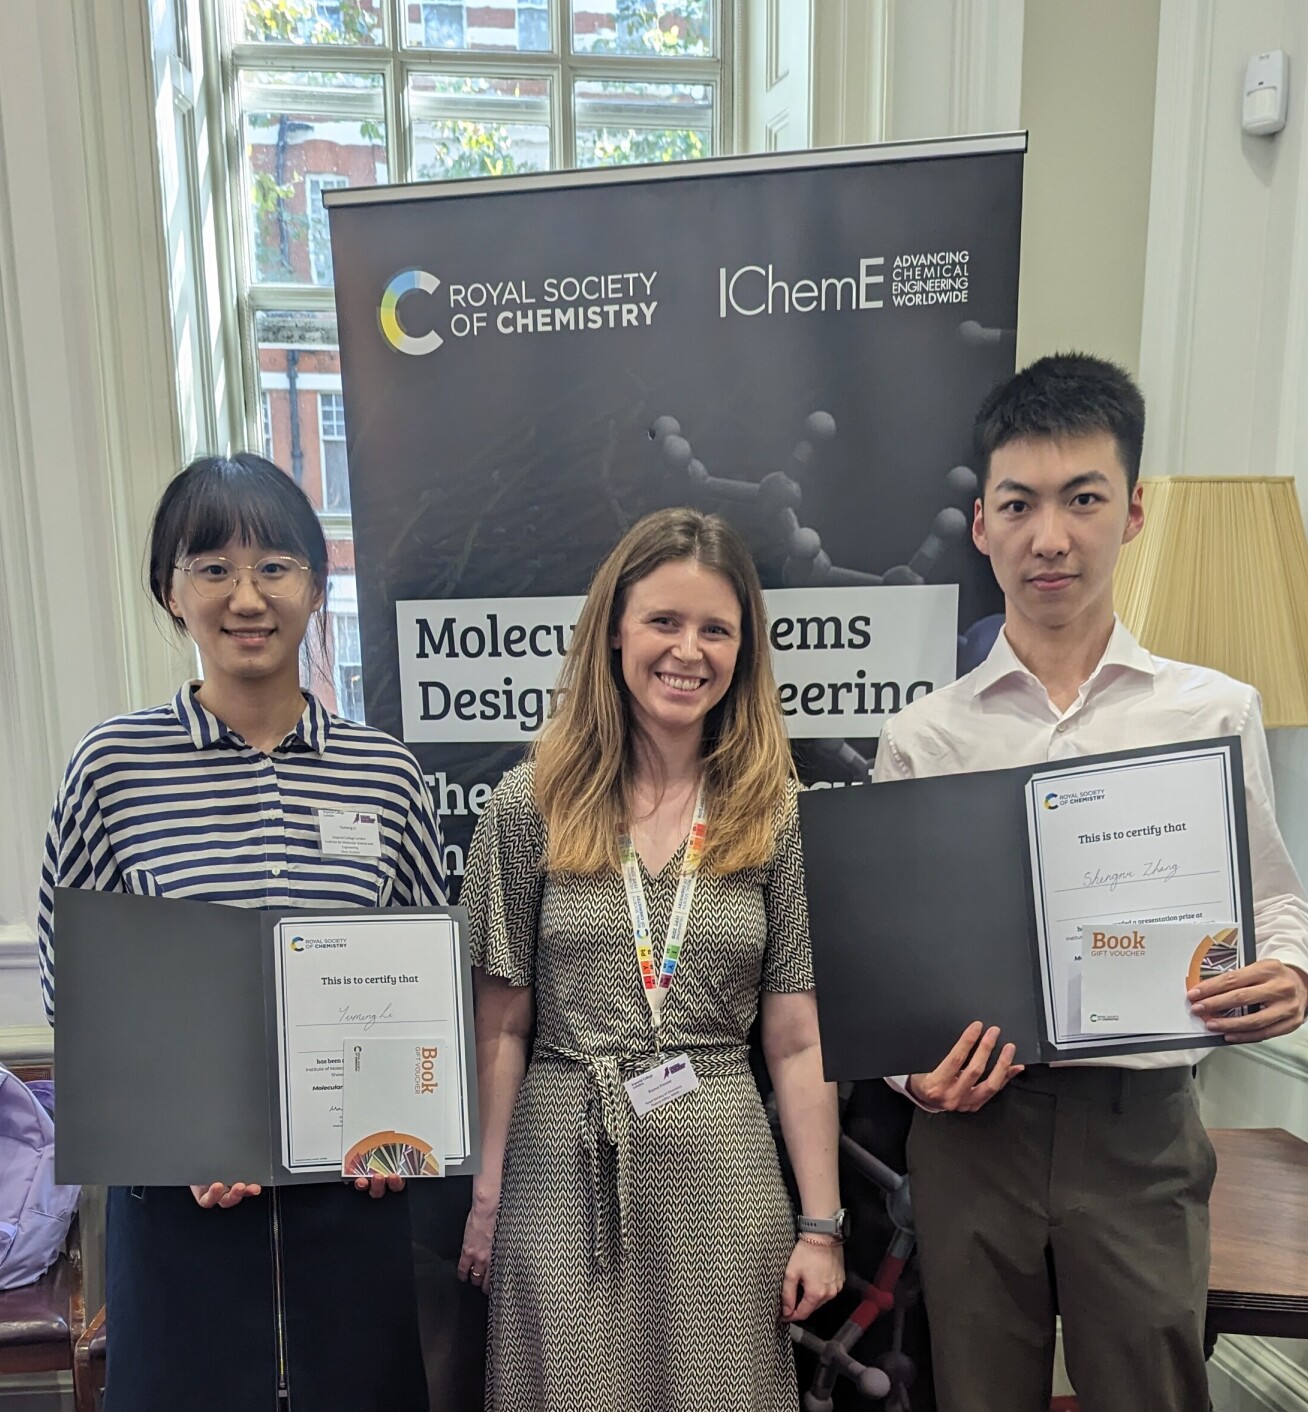 The Royal Society of Chemistry sponsored prizes for the best talk and poster presentations - winners Yumeng Li and Shengrui Zhang